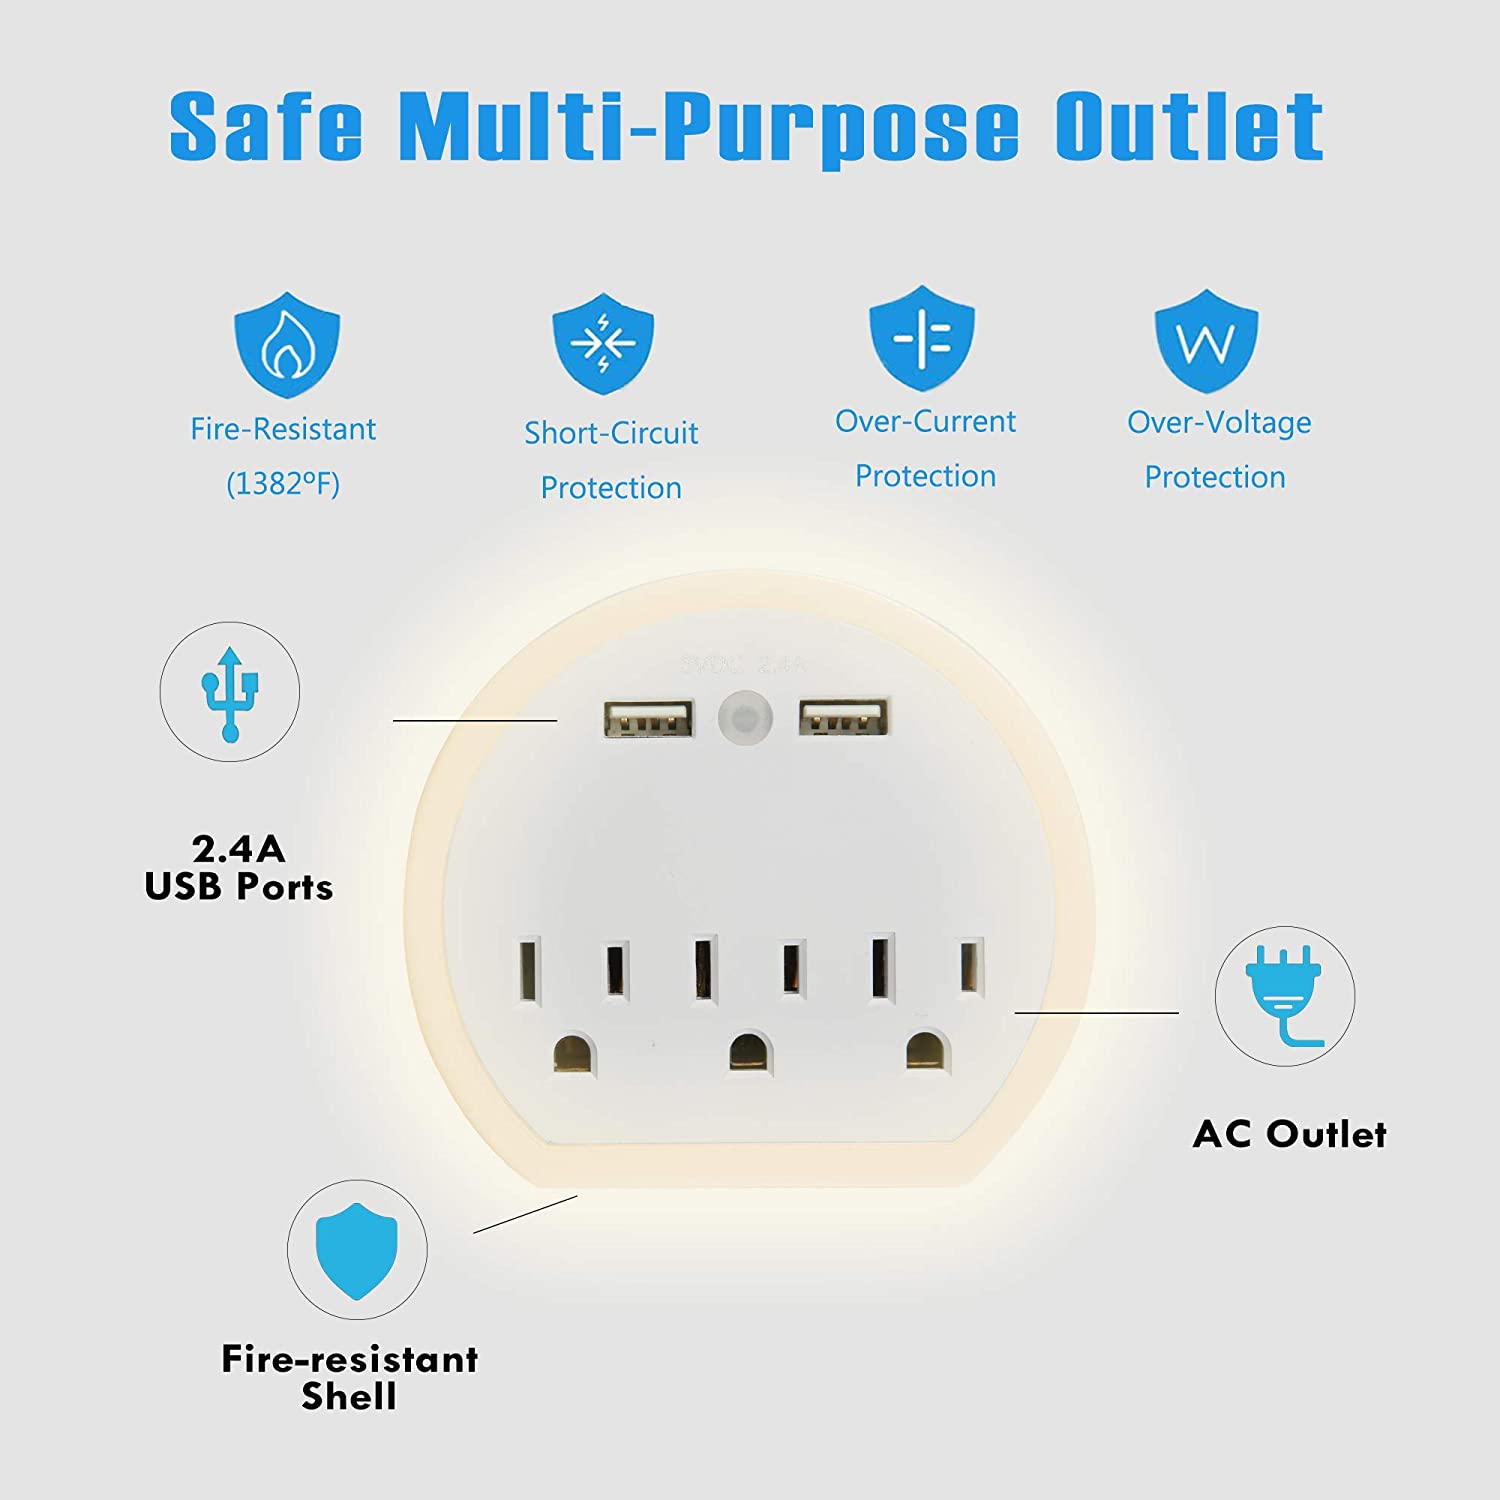 Wall Outlet Extender, Surge Protector Multi Plug Wall Charger with 3 Outlets and 2 USB Ports(5V/2.4A), Night Light Multiple Power Outlet for Cruise Ship Travel Office Home, White(2-Pack)